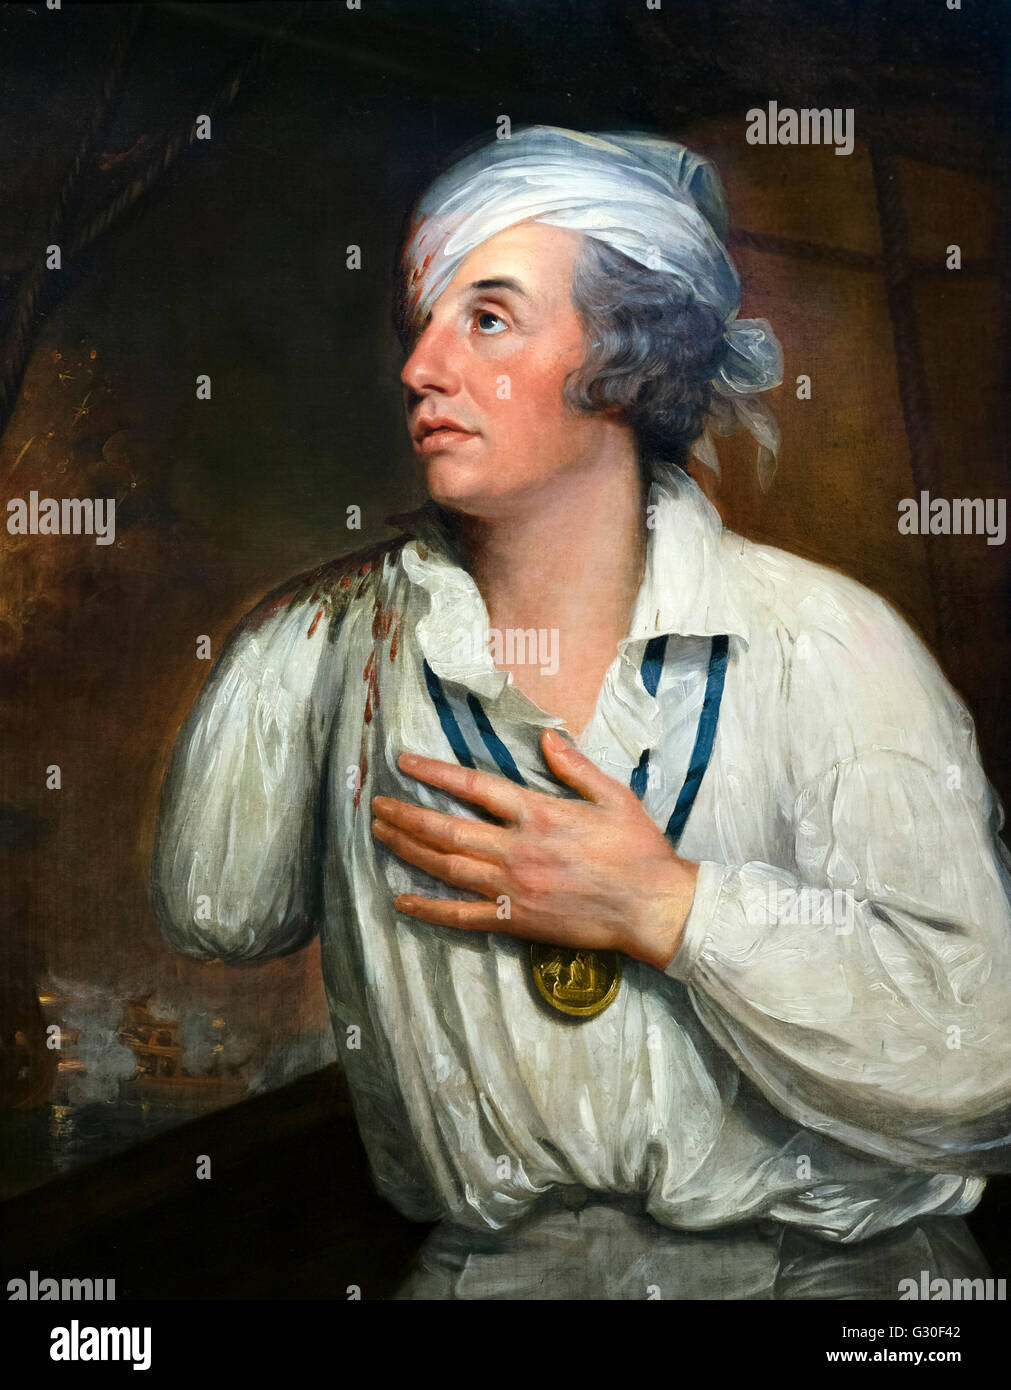 Lord Nelson. Portrait of Rear-Admiral Sir Horatio Nelson, attributed to Guy Head, oil on canvas, c.1800. This painting shows Nelson after being wounded in the Battle of the Nile in 1798. Stock Photo